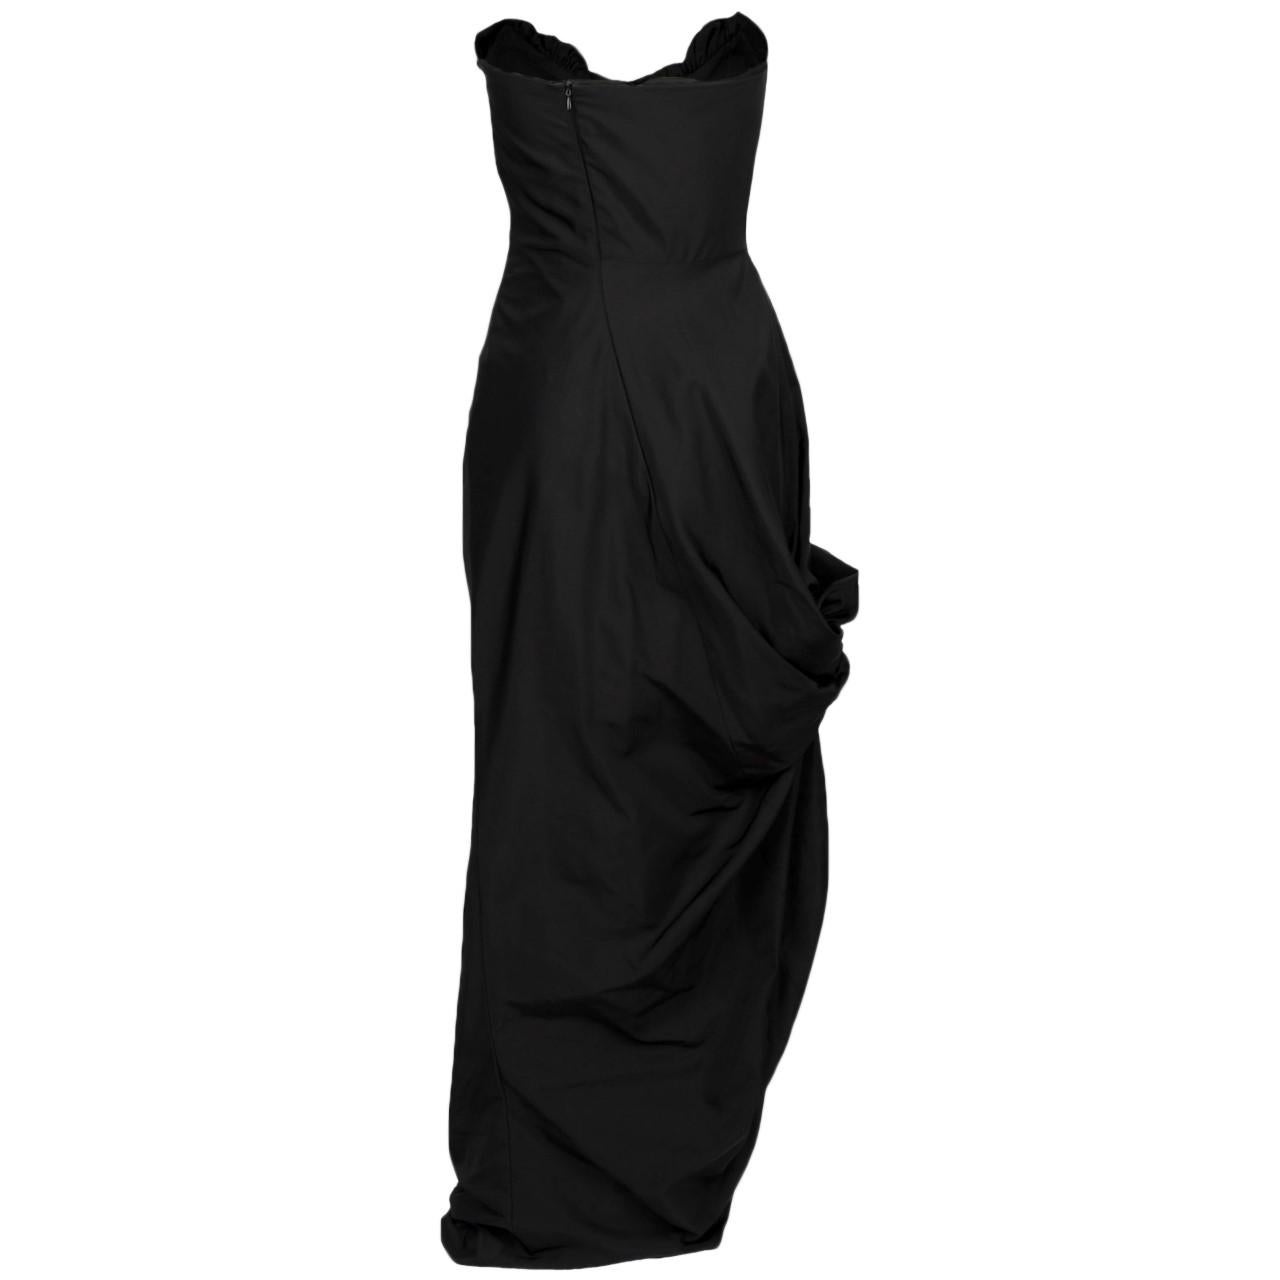 The stunning Vivienne Westwood black taffeta dress is a corset dress with front ruffled detail. The zip fastening serves both a functional and aesthetic purpose. It is the enchanting shape of the dress makes it truly showstopper-worthy.

NFT option